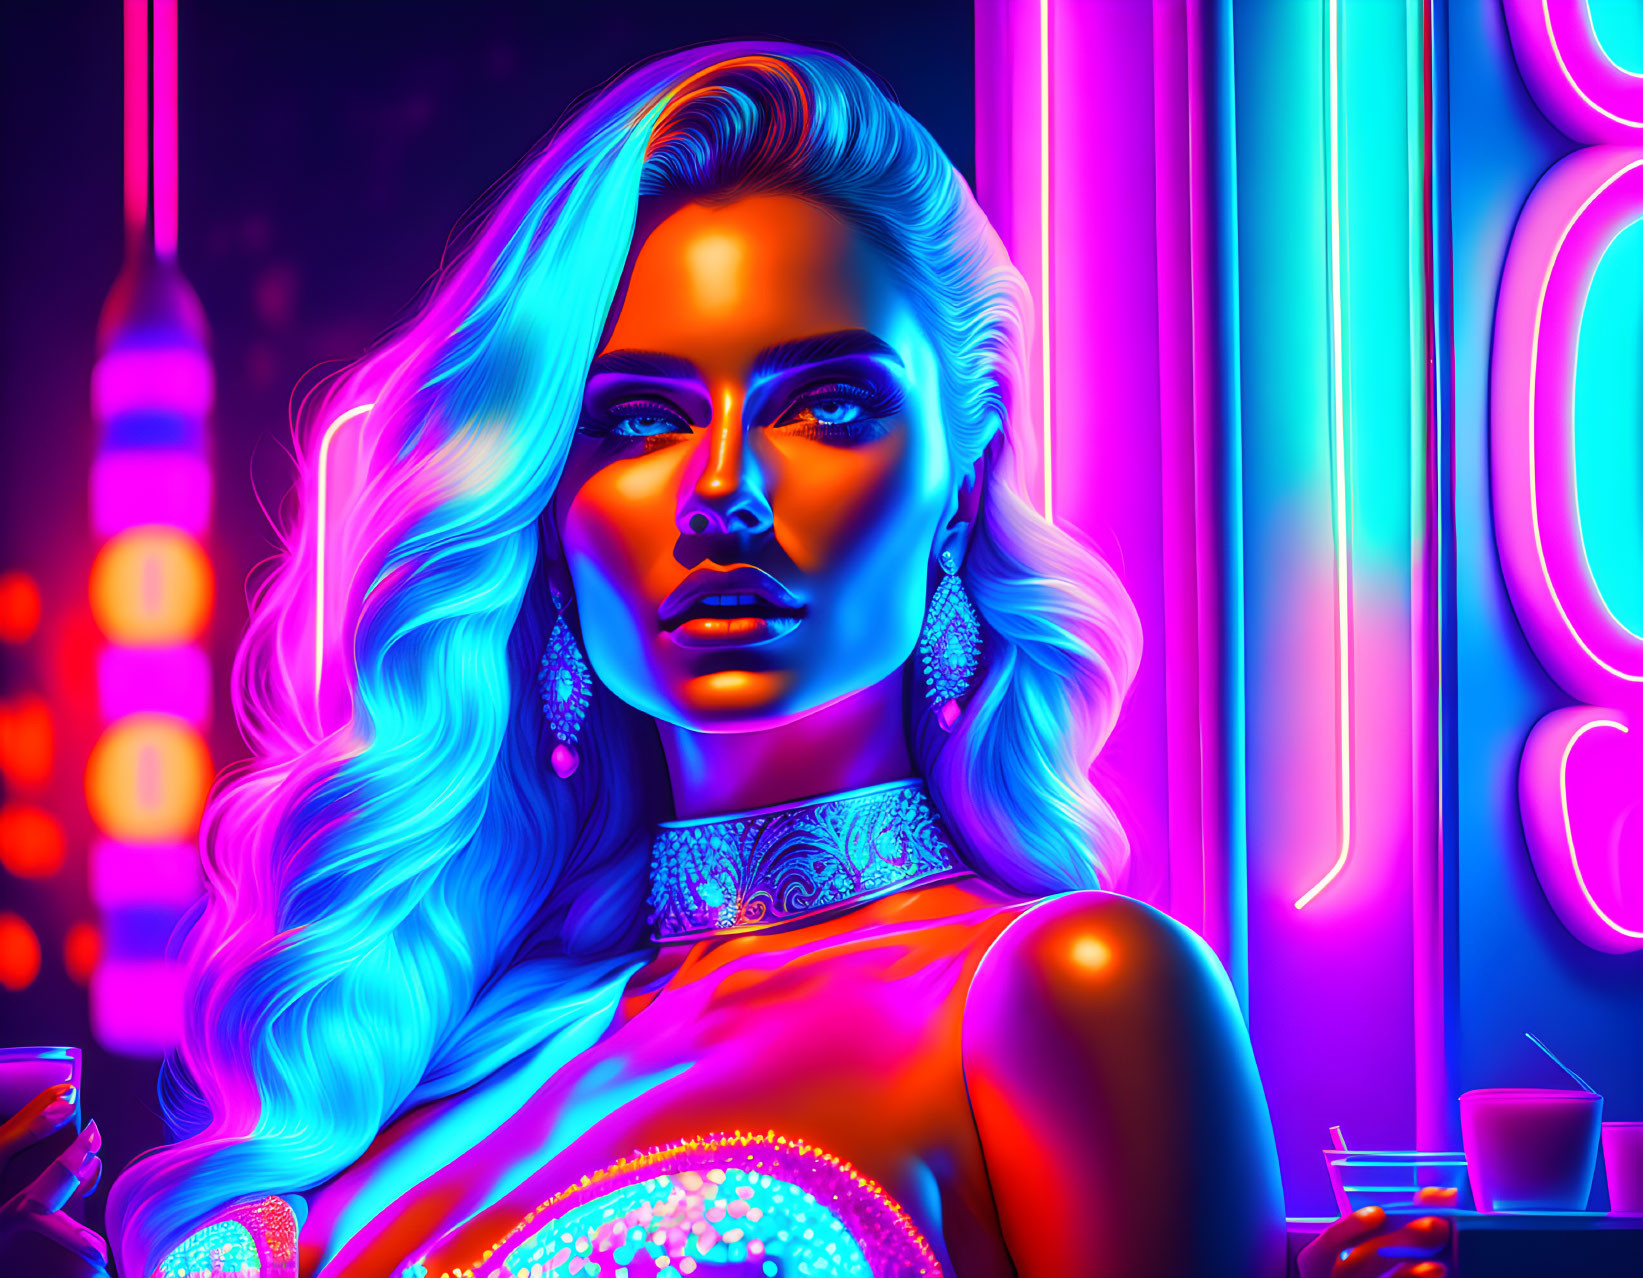 Vibrant digital portrait of woman with blue skin and blonde hair under neon lights